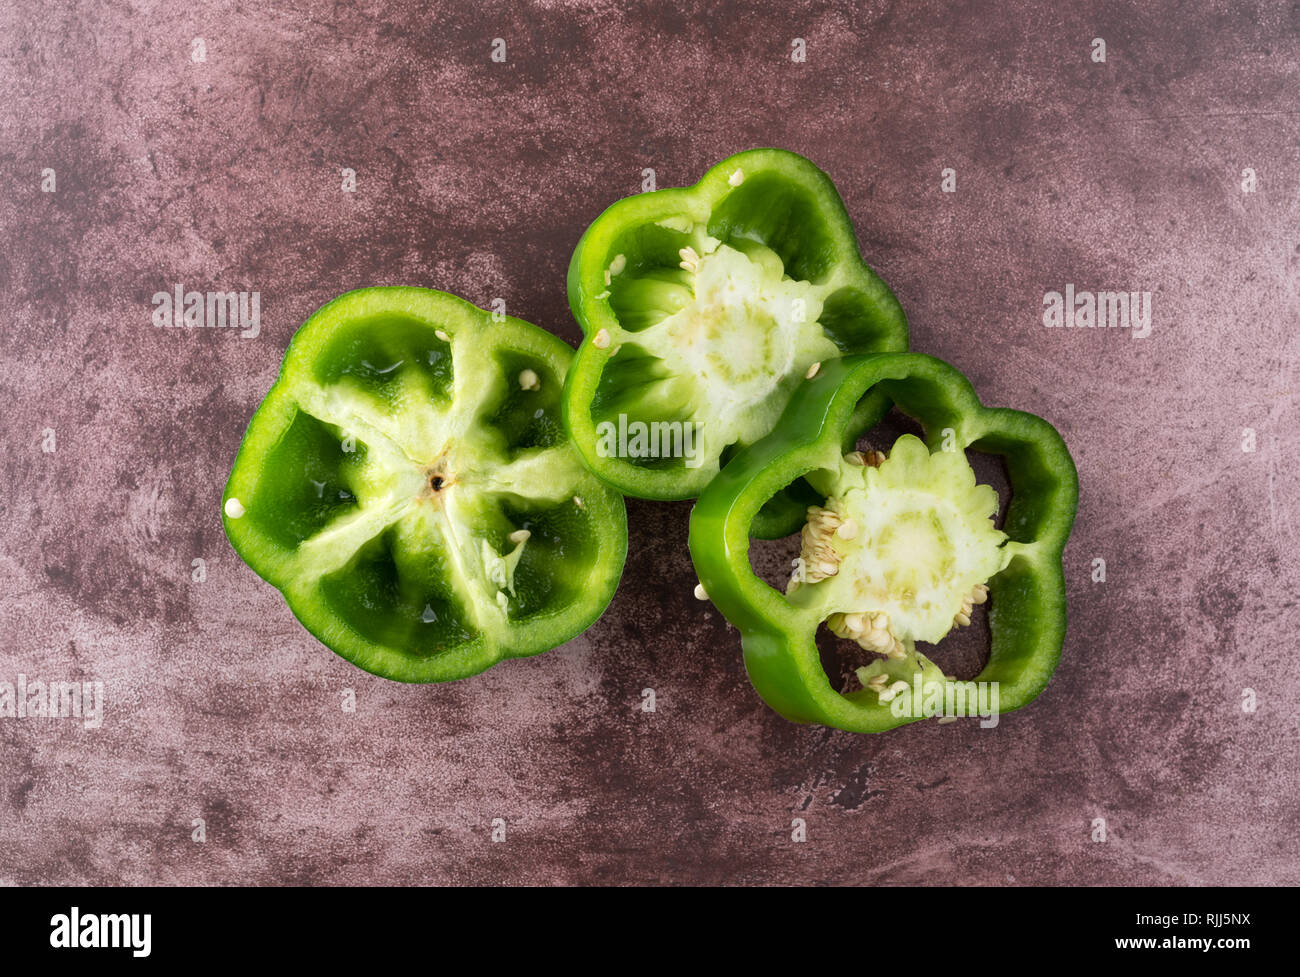 Top view of three slices of green bell pepper on a maroon counter top. Stock Photo